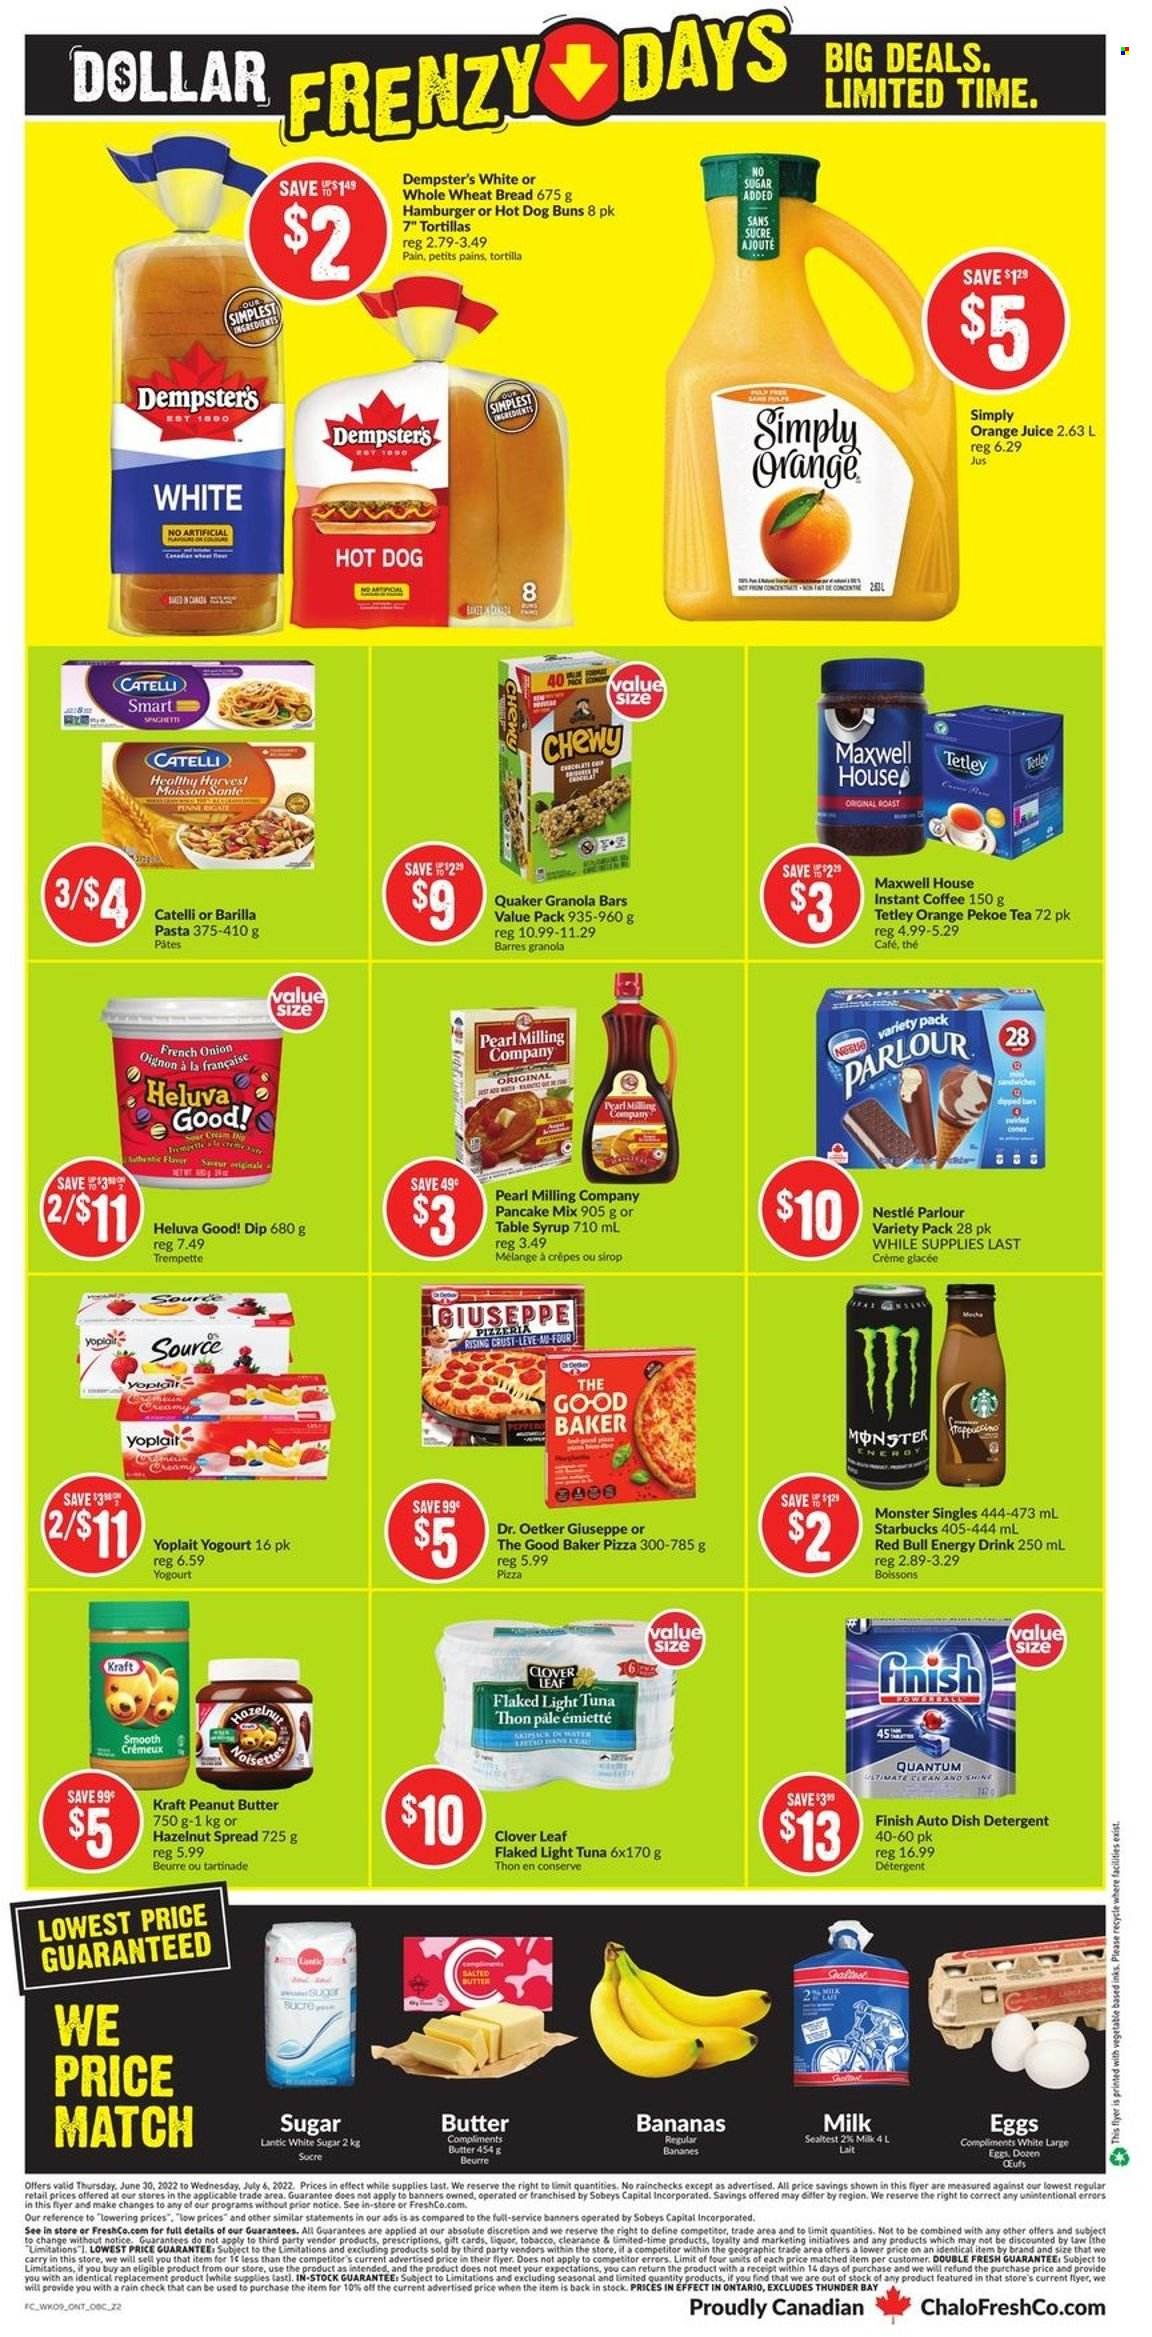 thumbnail - Chalo! FreshCo. Flyer - June 30, 2022 - July 06, 2022 - Sales products - tortillas, wheat bread, buns, onion, bananas, tuna, pizza, pasta, pancakes, Quaker, Kraft®, Dr. Oetker, Clover, Yoplait, milk, large eggs, salted butter, sour cream, chocolate, light tuna, granola bar, peanut butter, syrup, hazelnut spread, orange juice, juice, energy drink, Monster, Red Bull, Monster Energy, Maxwell House, tea, instant coffee, Starbucks, Absolute, detergent, Nestlé, Barilla. Page 4.